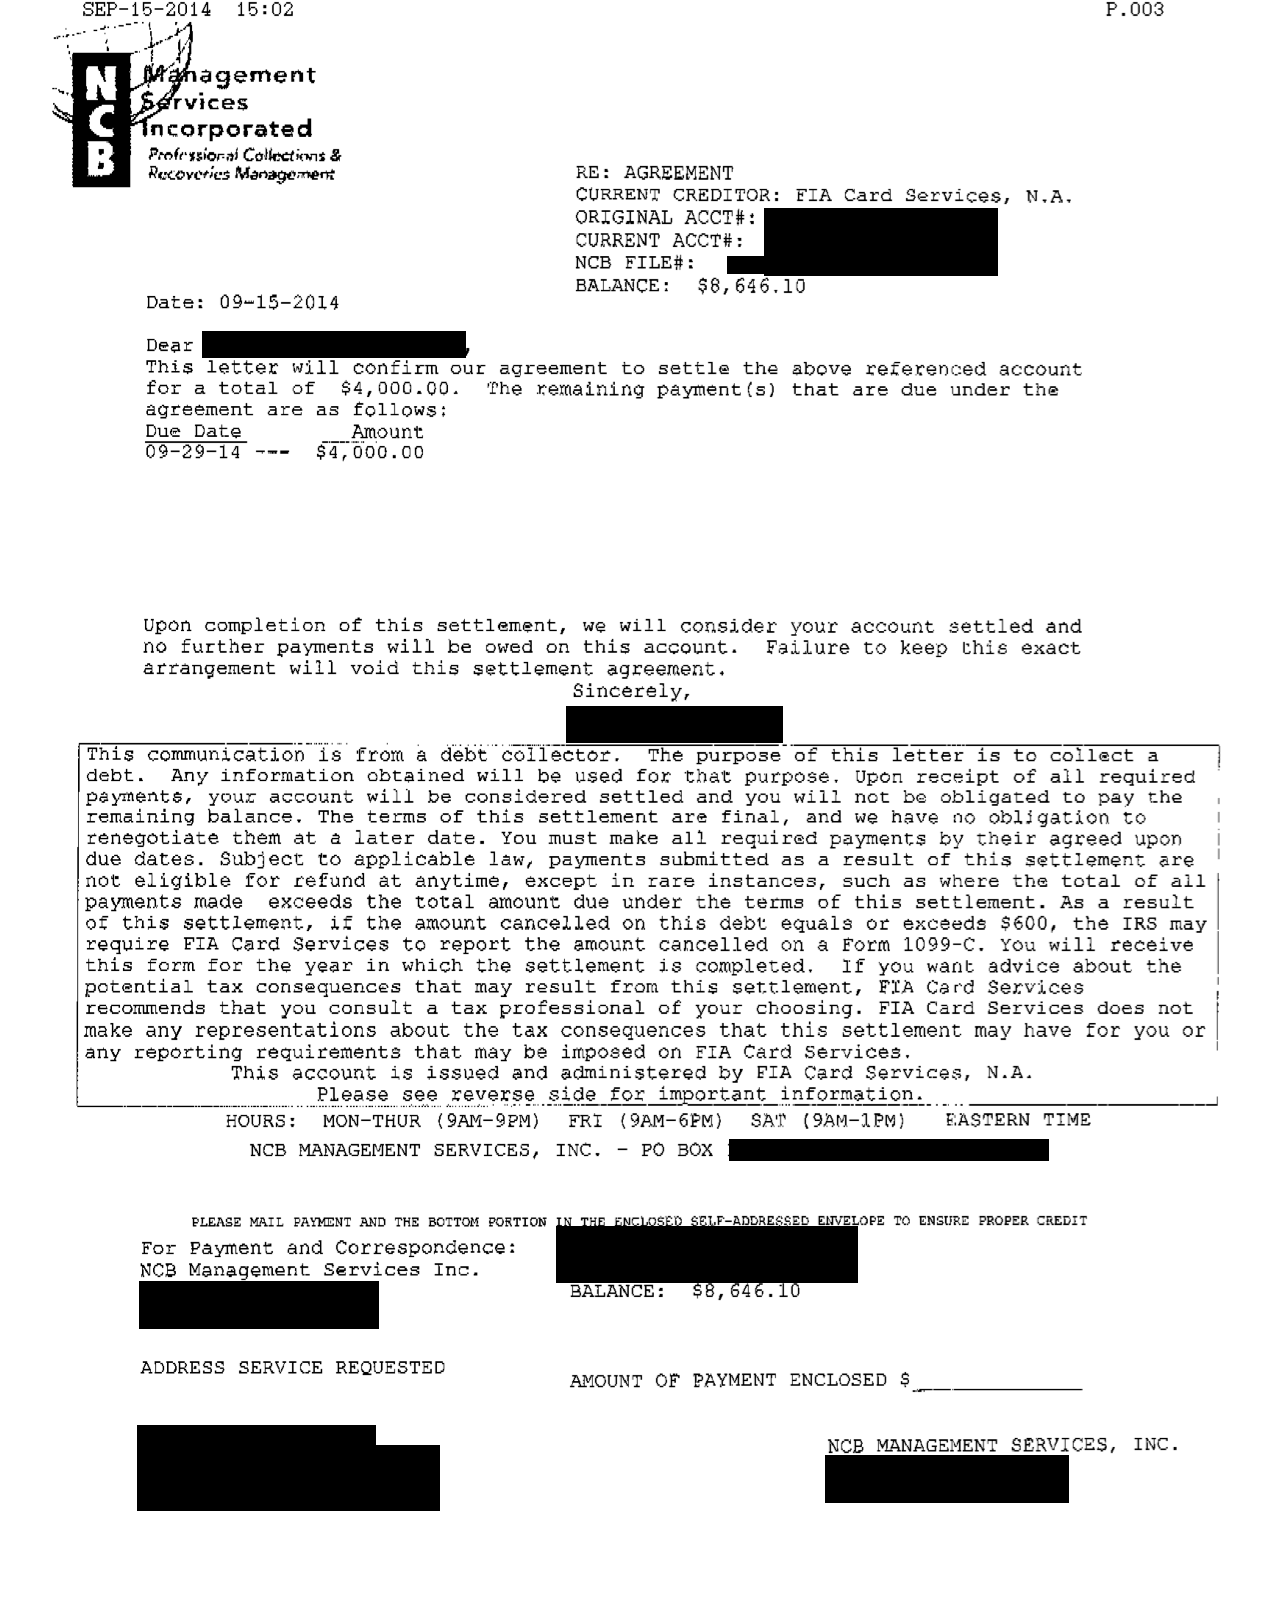 Image of a settlement letter with FIA Card Services with savings of 4,646 dollars